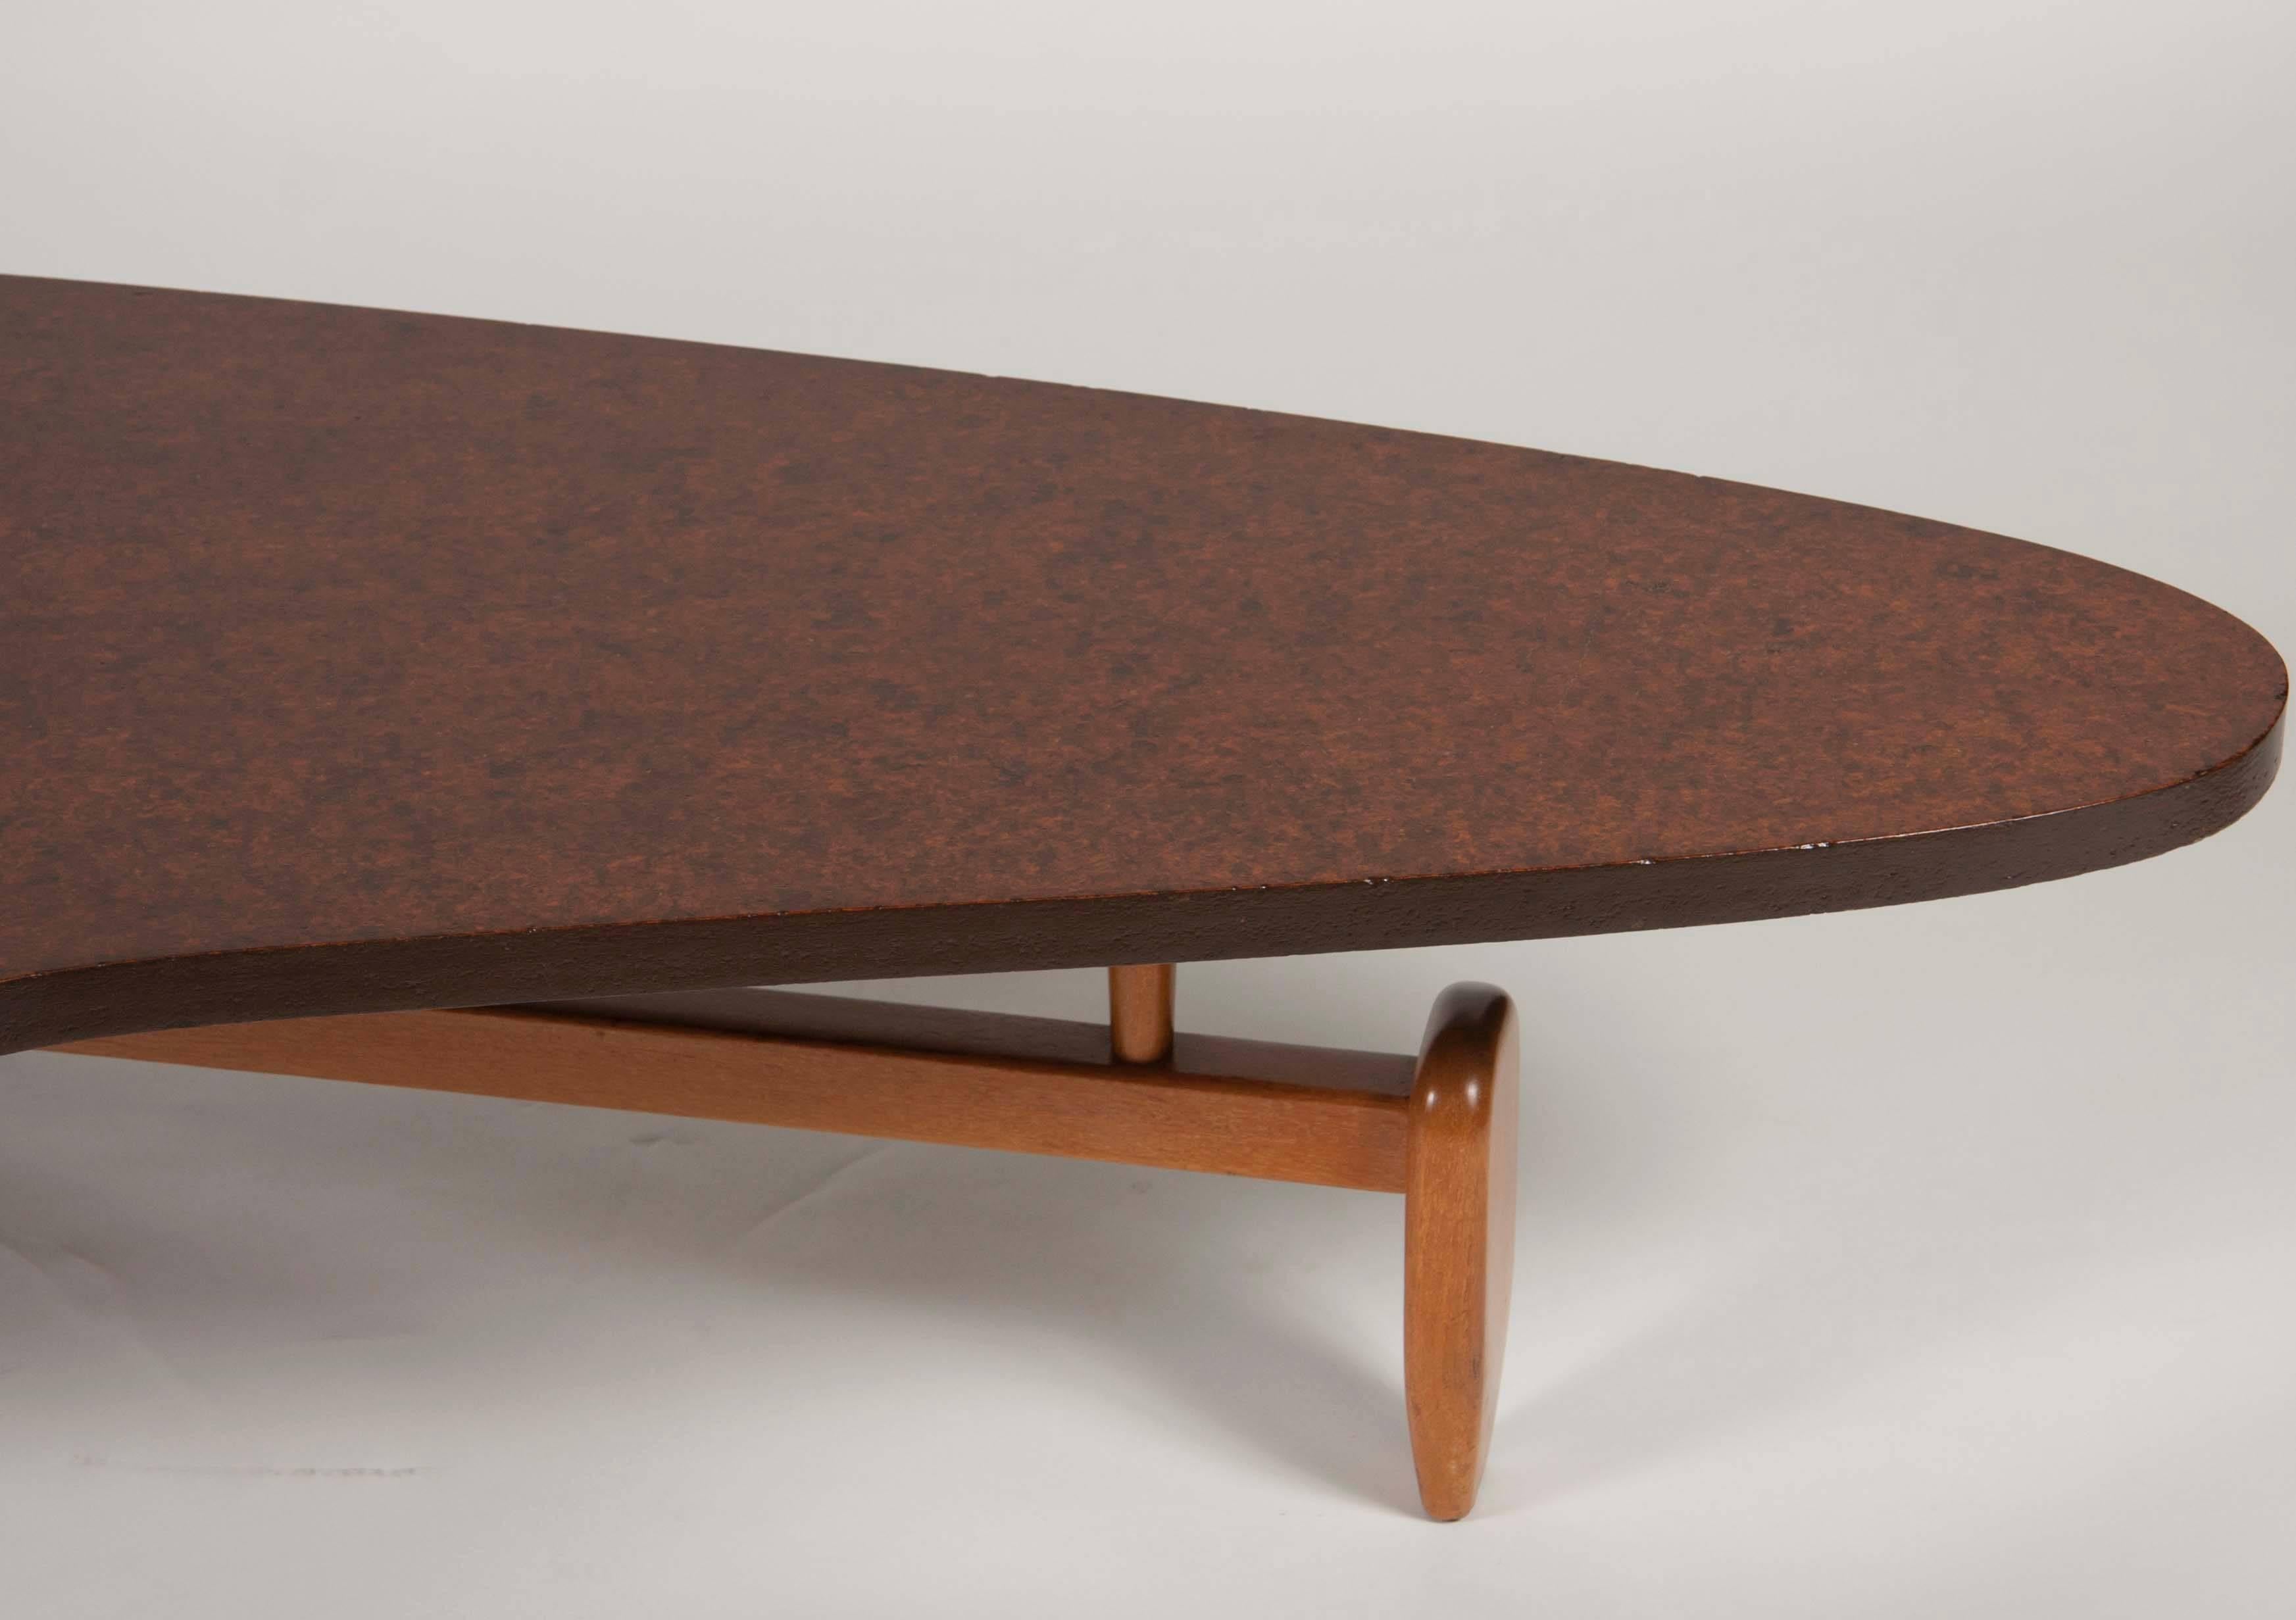 Mahogany Floating Top Coffee Table by John Keal for Brown Saltman